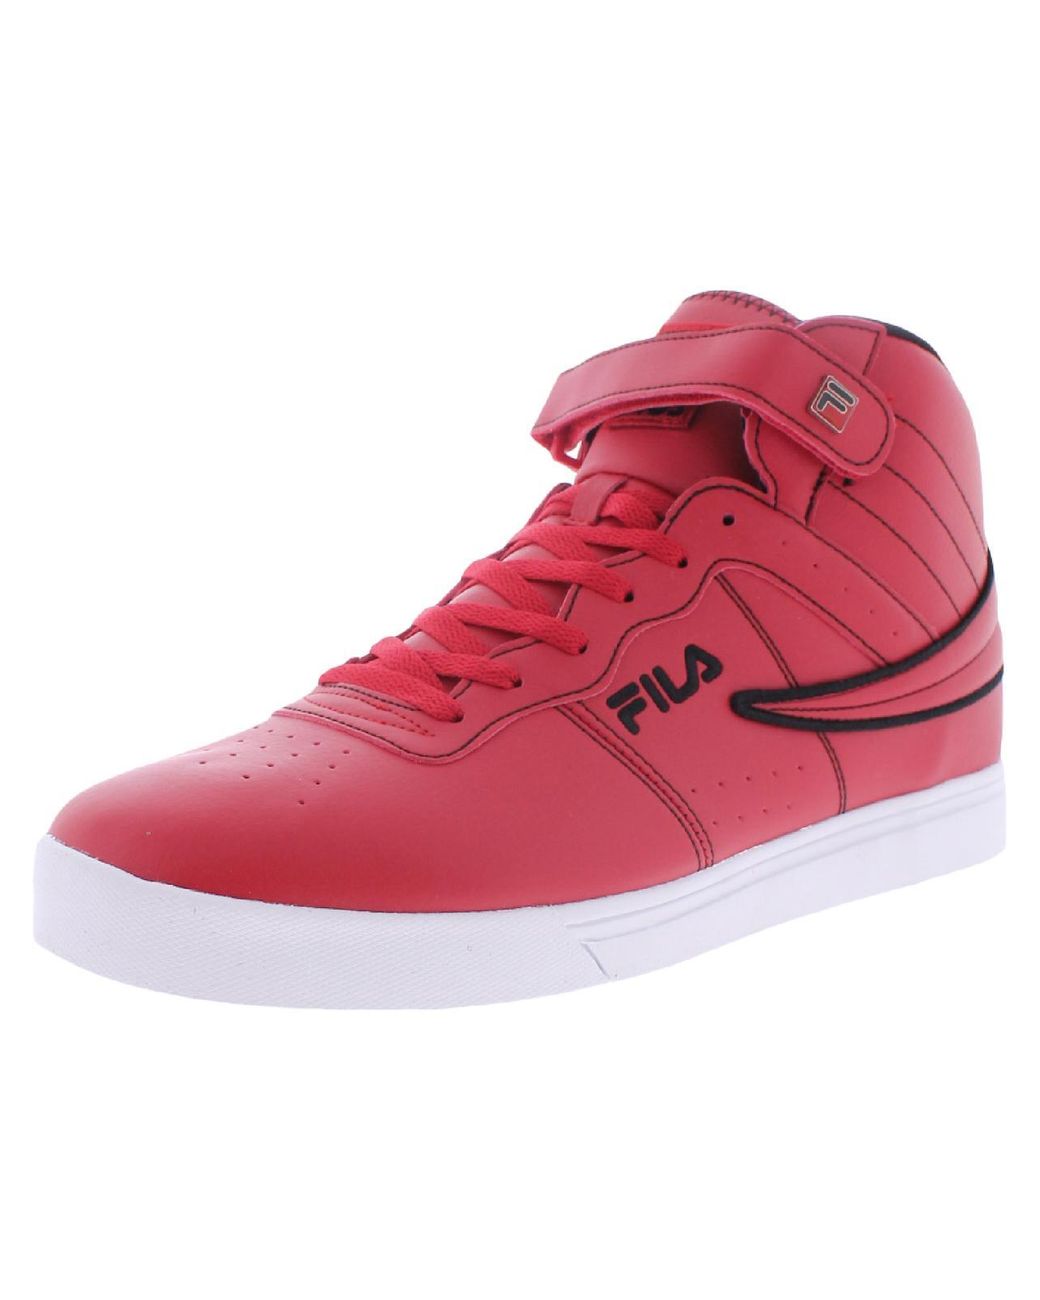 Fila Vulc 13 Top Stitch Faux Leather Adjustable High-top Sneakers in ...